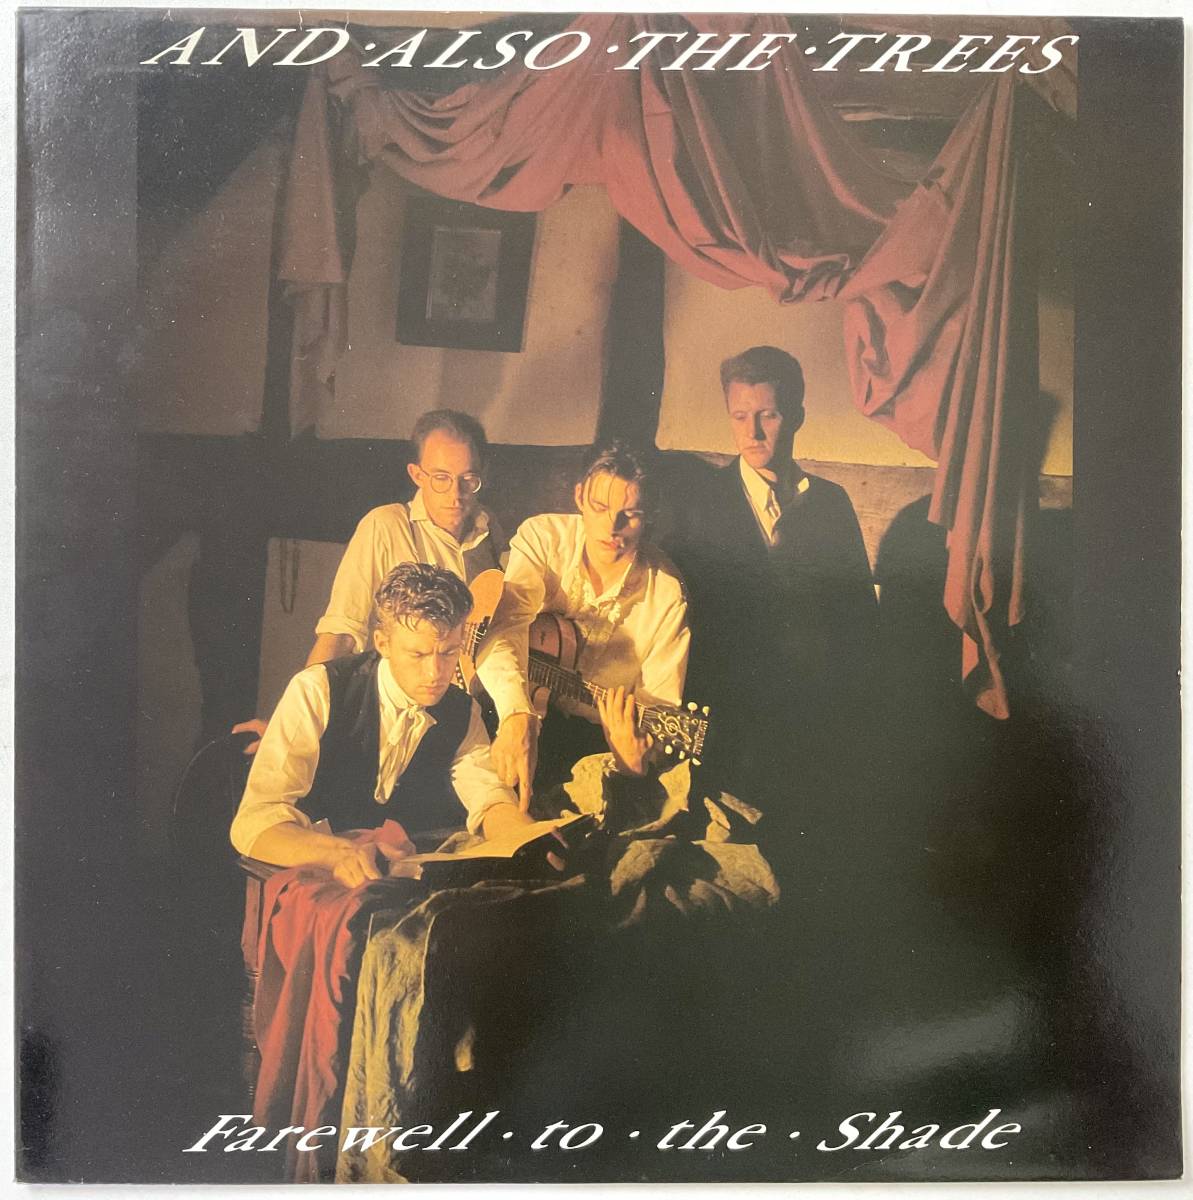 UK original 1989 AND ALSO THE TREES Farewell To The Shade Reflex Records LEX10 レコード LP w/inner New Wave Indie Rock Post Punk_画像2